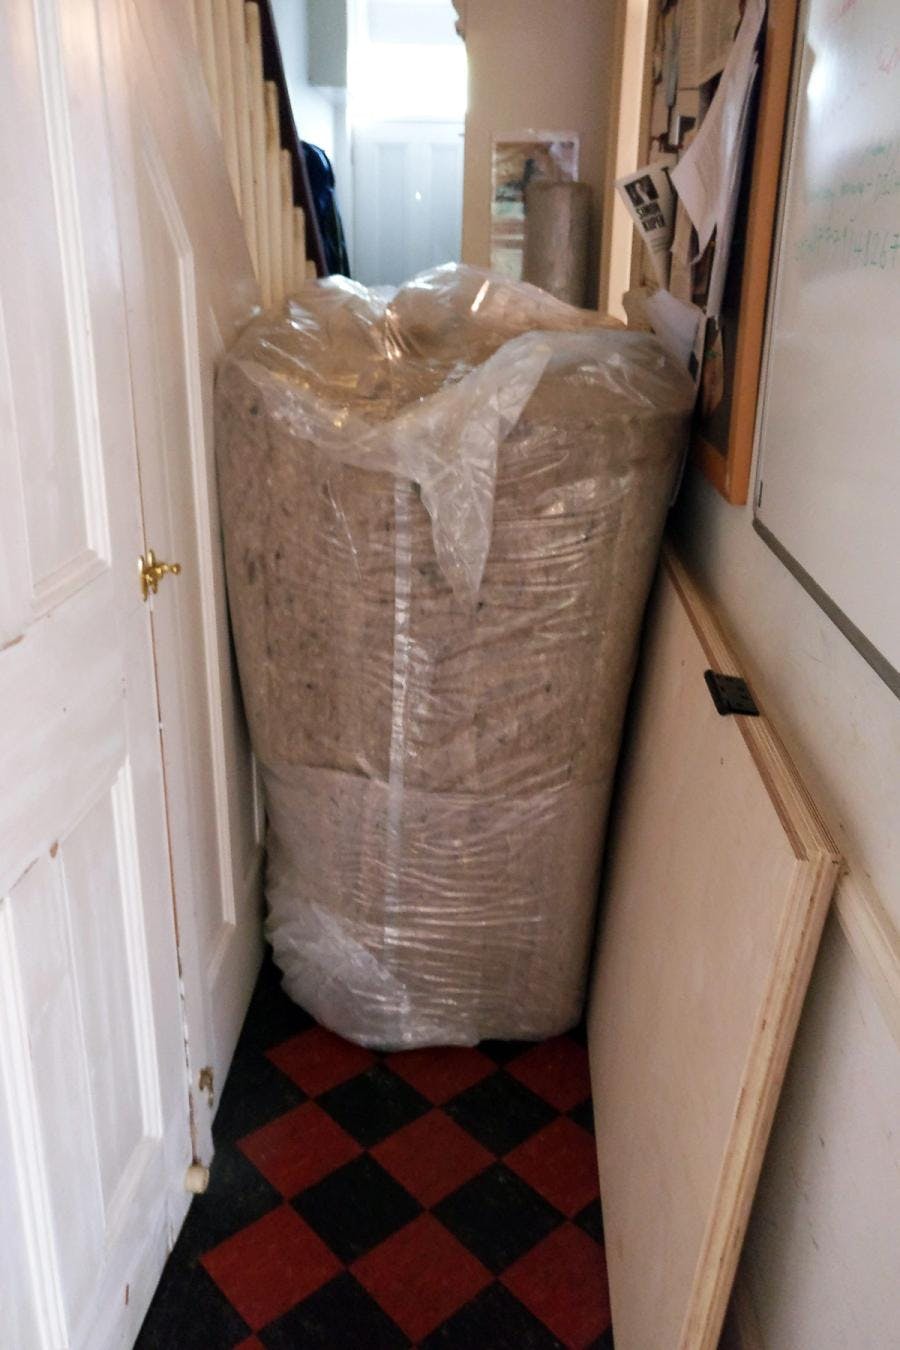 Roll of sheep's wool insulation sits within a hallway